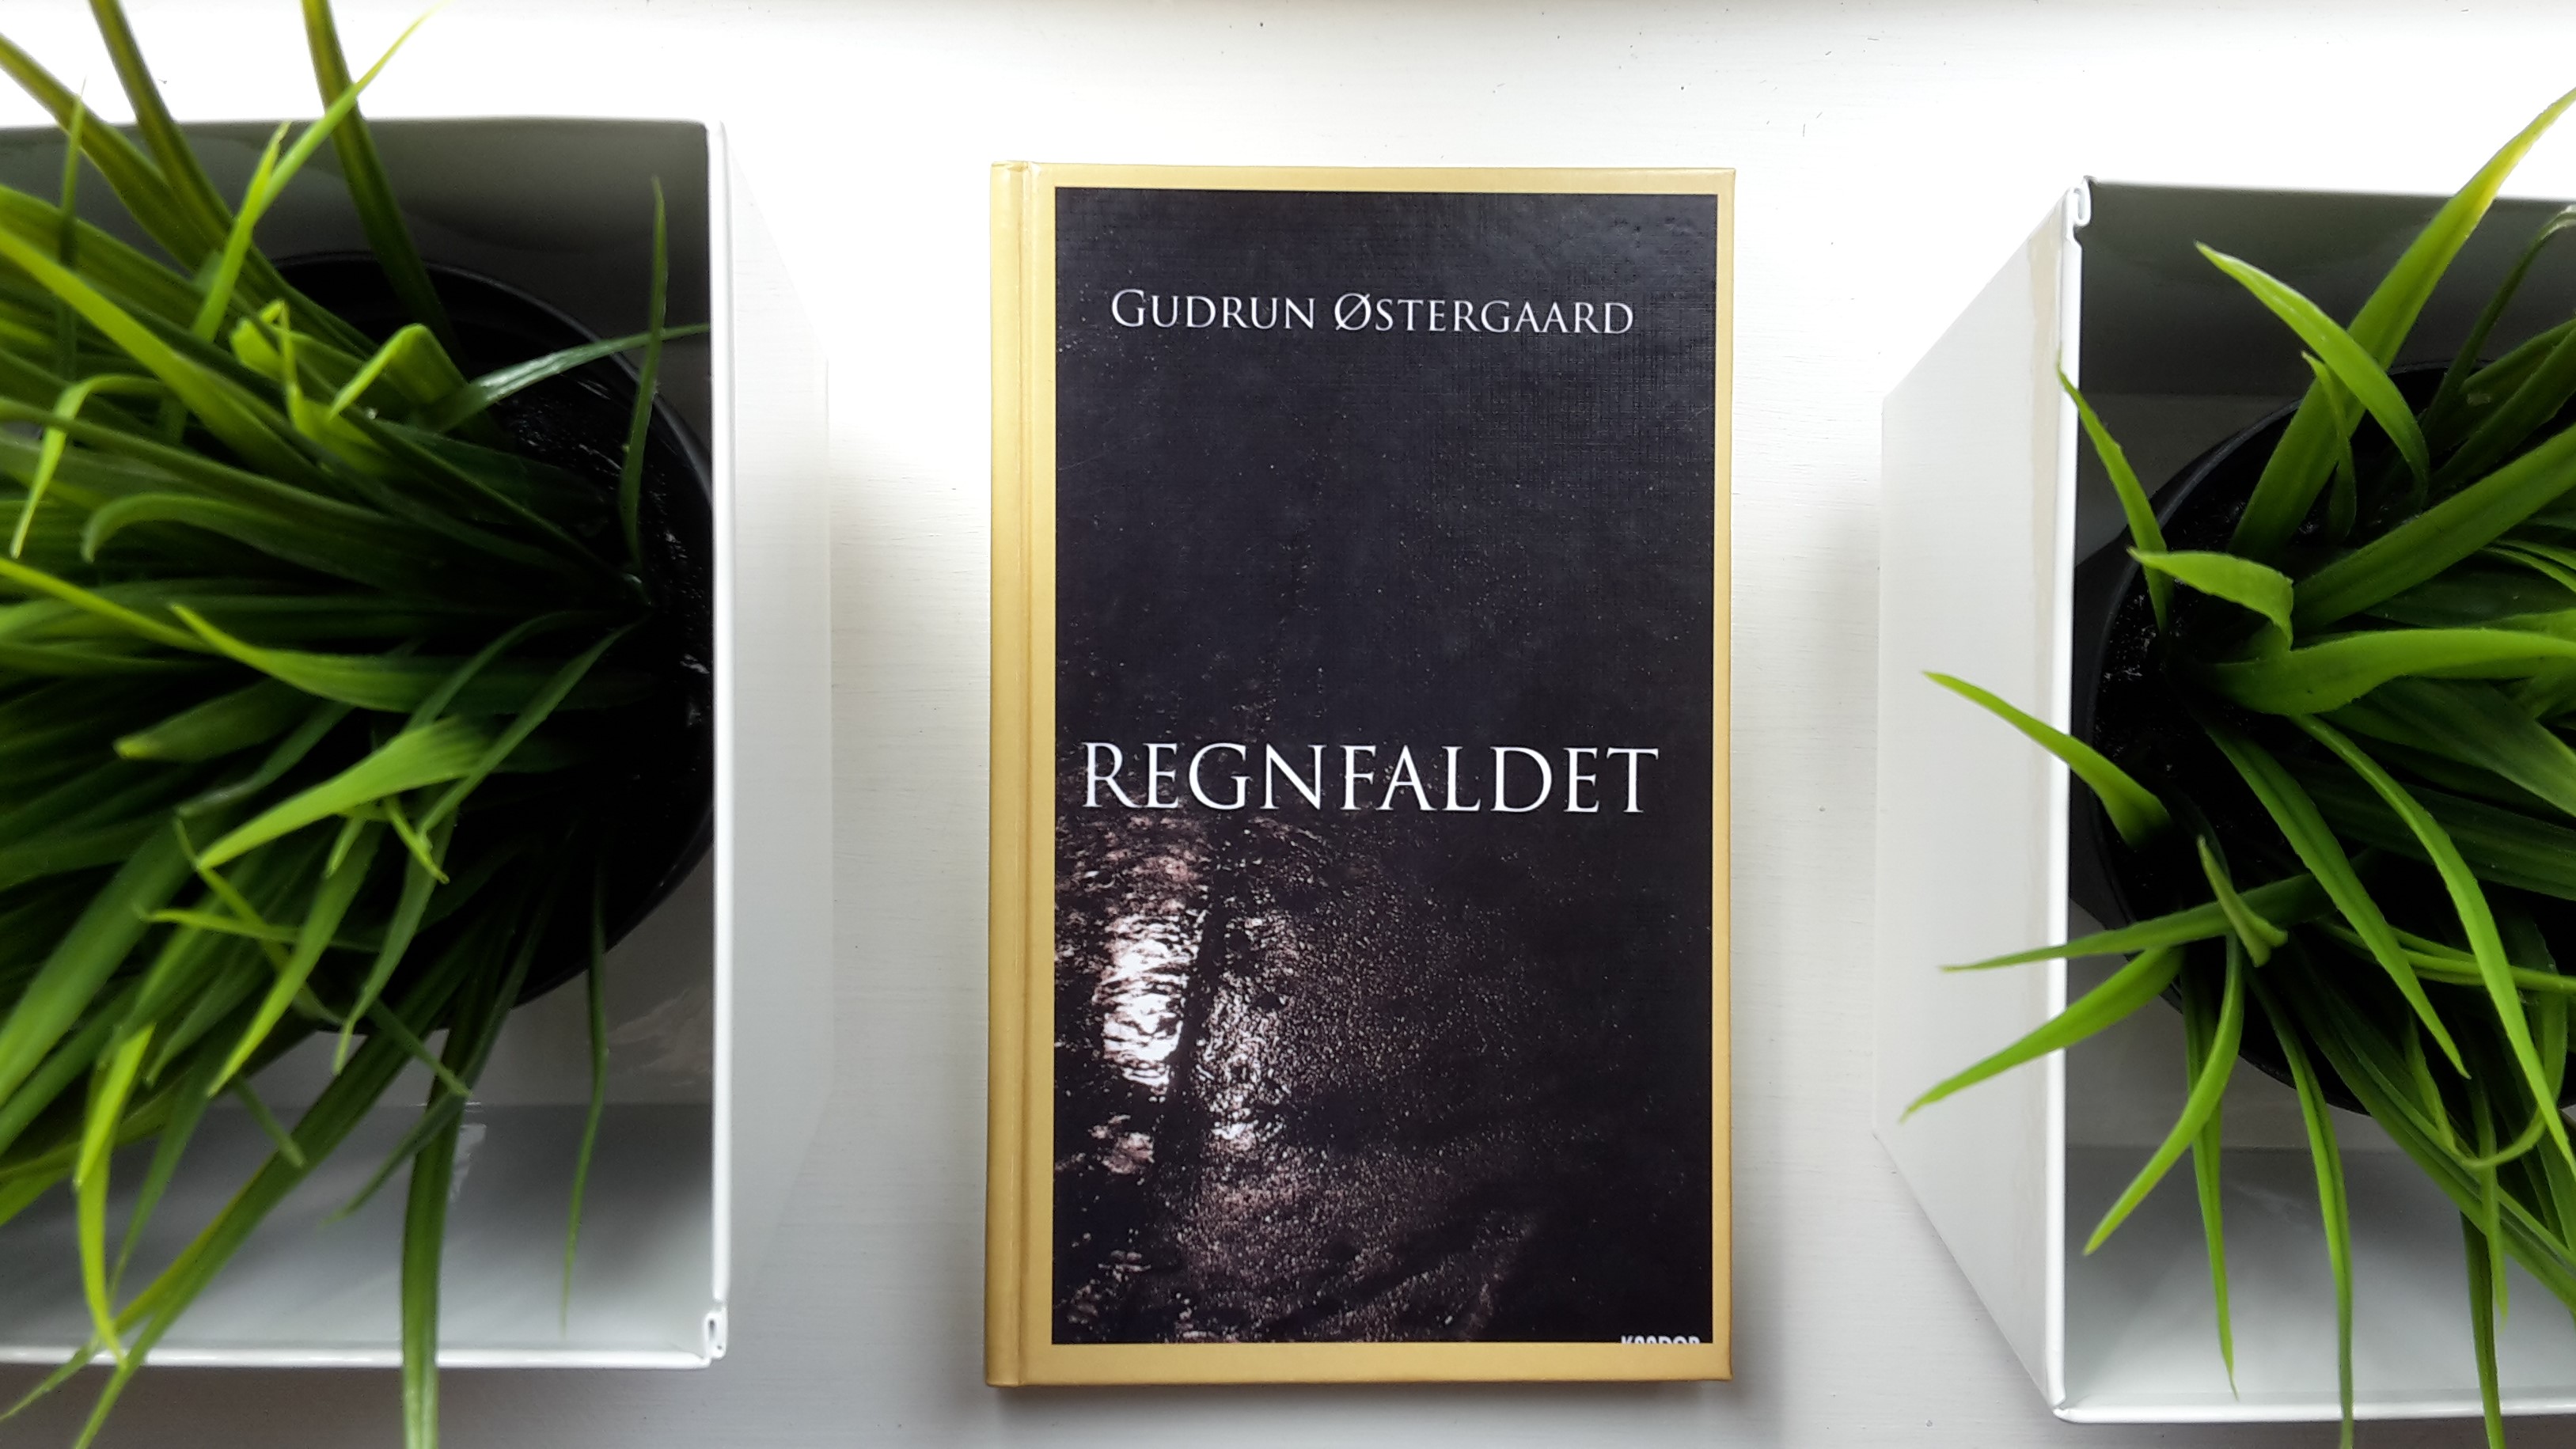 The Book Regnfaldet (in English: The Rainfall) is lying between green plants